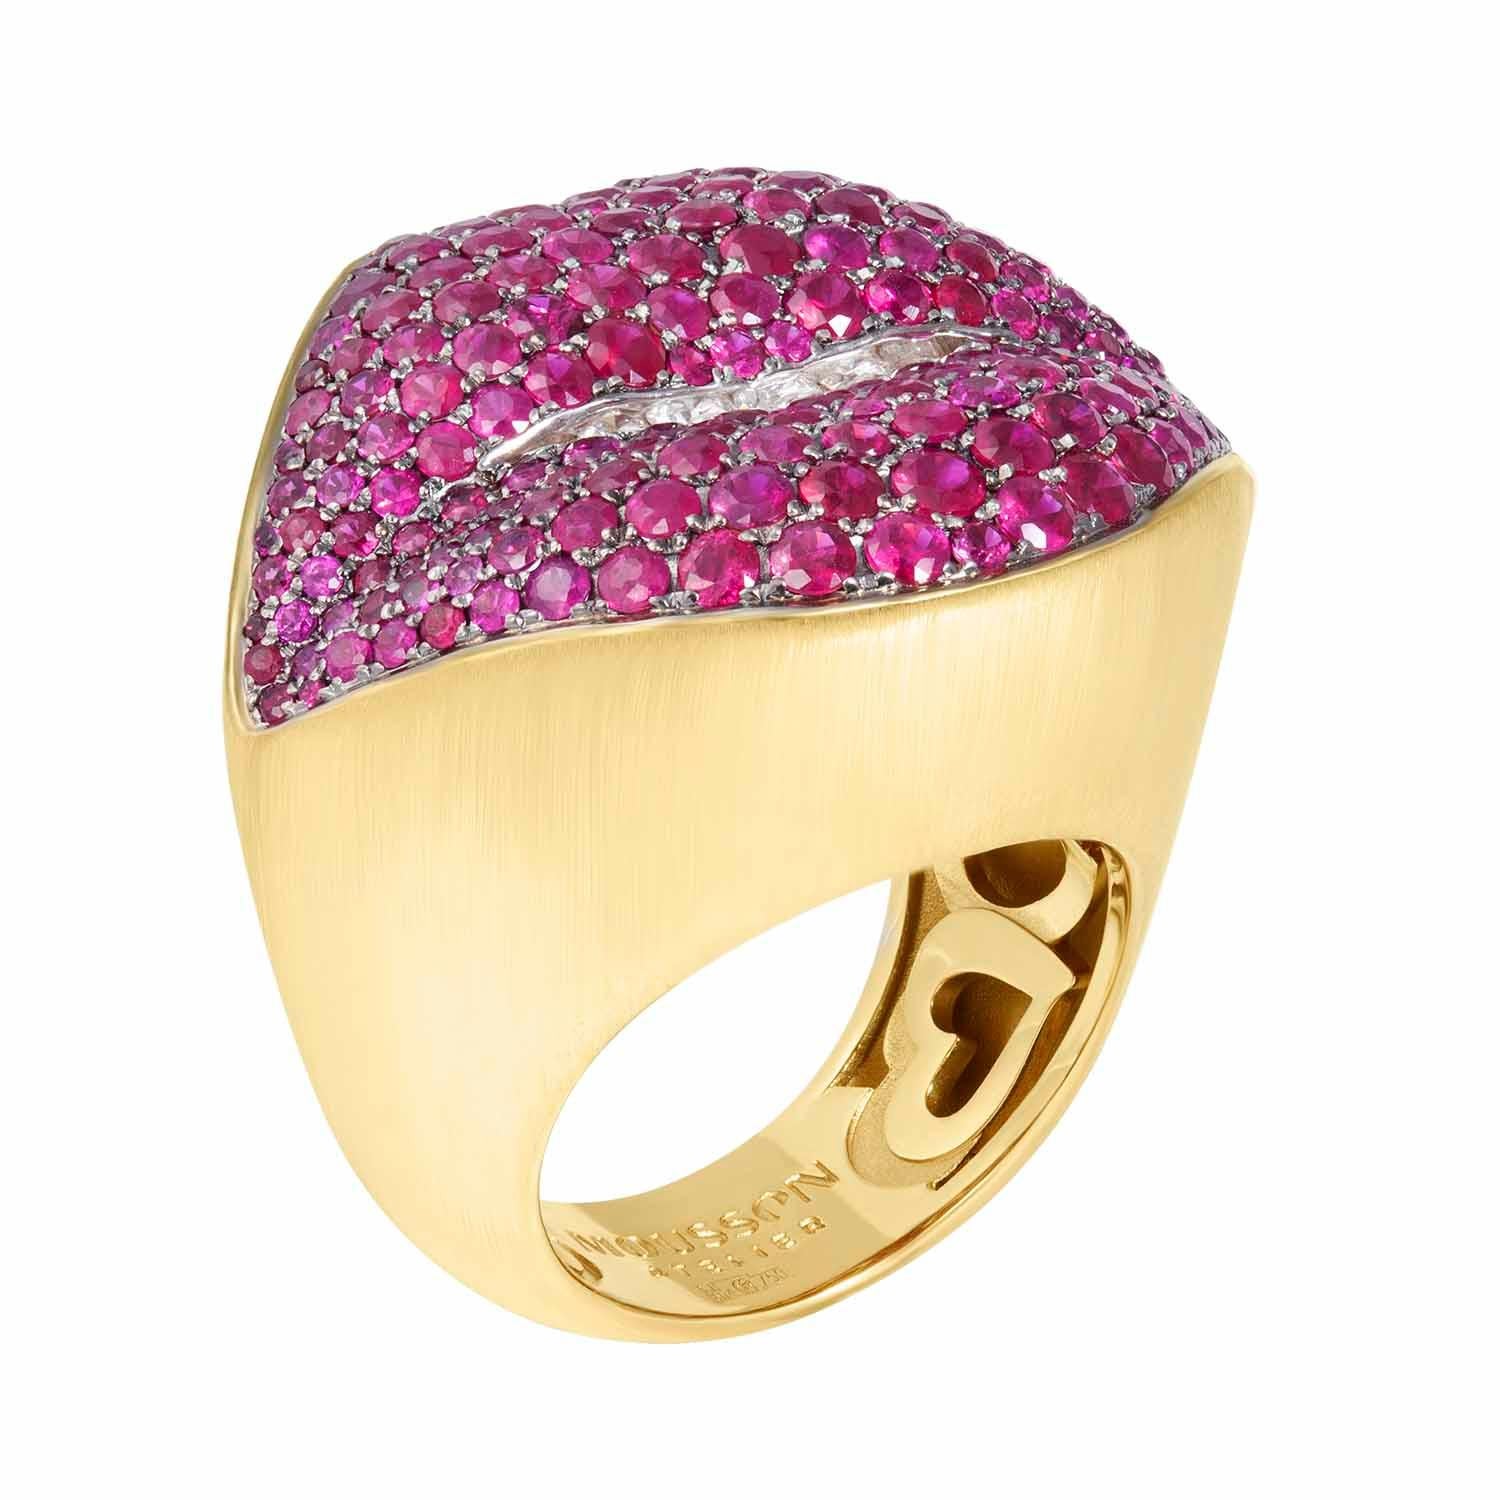 Rubies Diamonds Kiss Me Baby 18 Karat Yellow Gold Ring
The brightly painted female mouth has long been exploited by artists as the most intelligible symbol of femininity and beauty. We decided to recall the most vivid statements of artists and